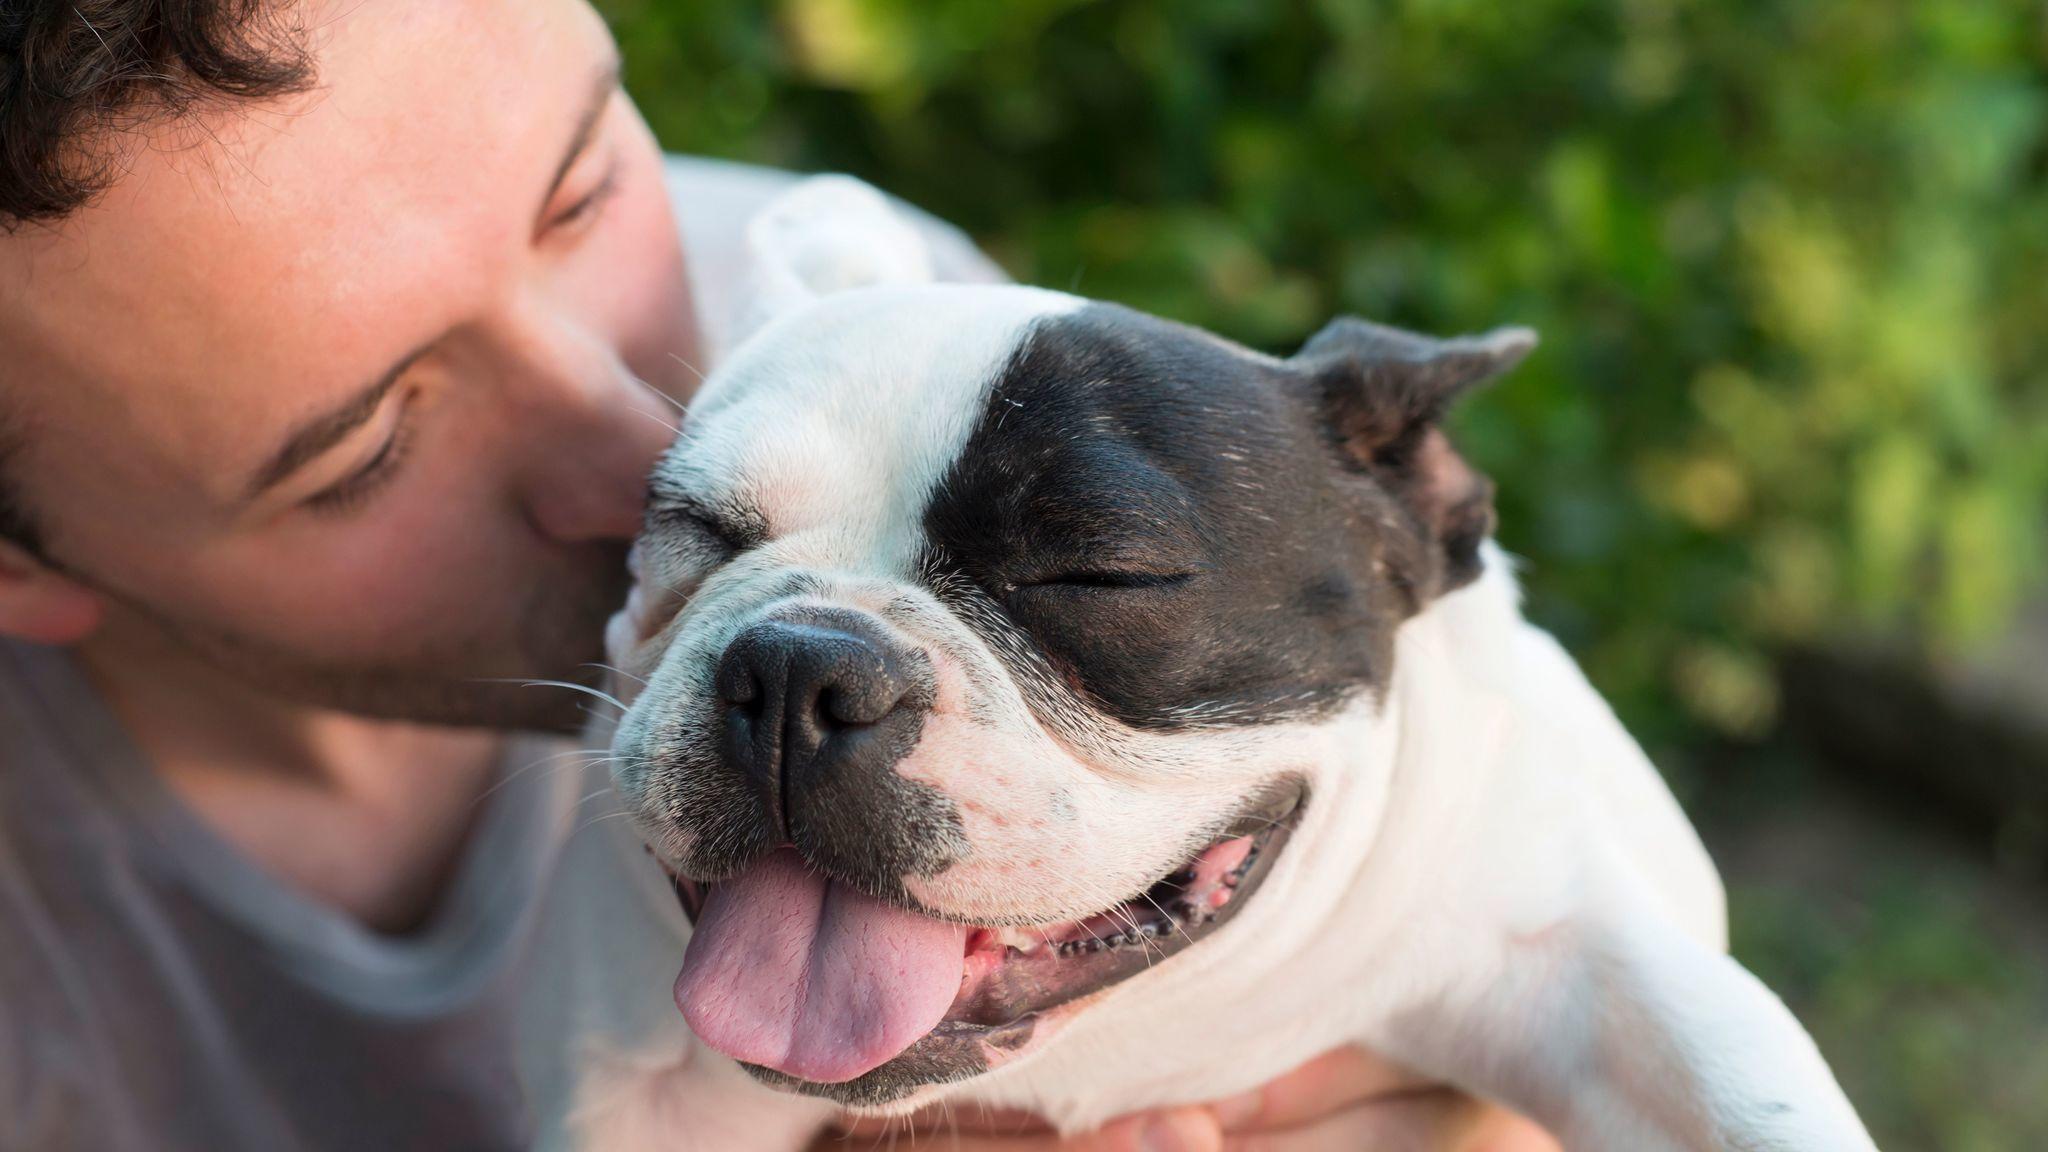 Survey shows love for dogs makes you more attractive